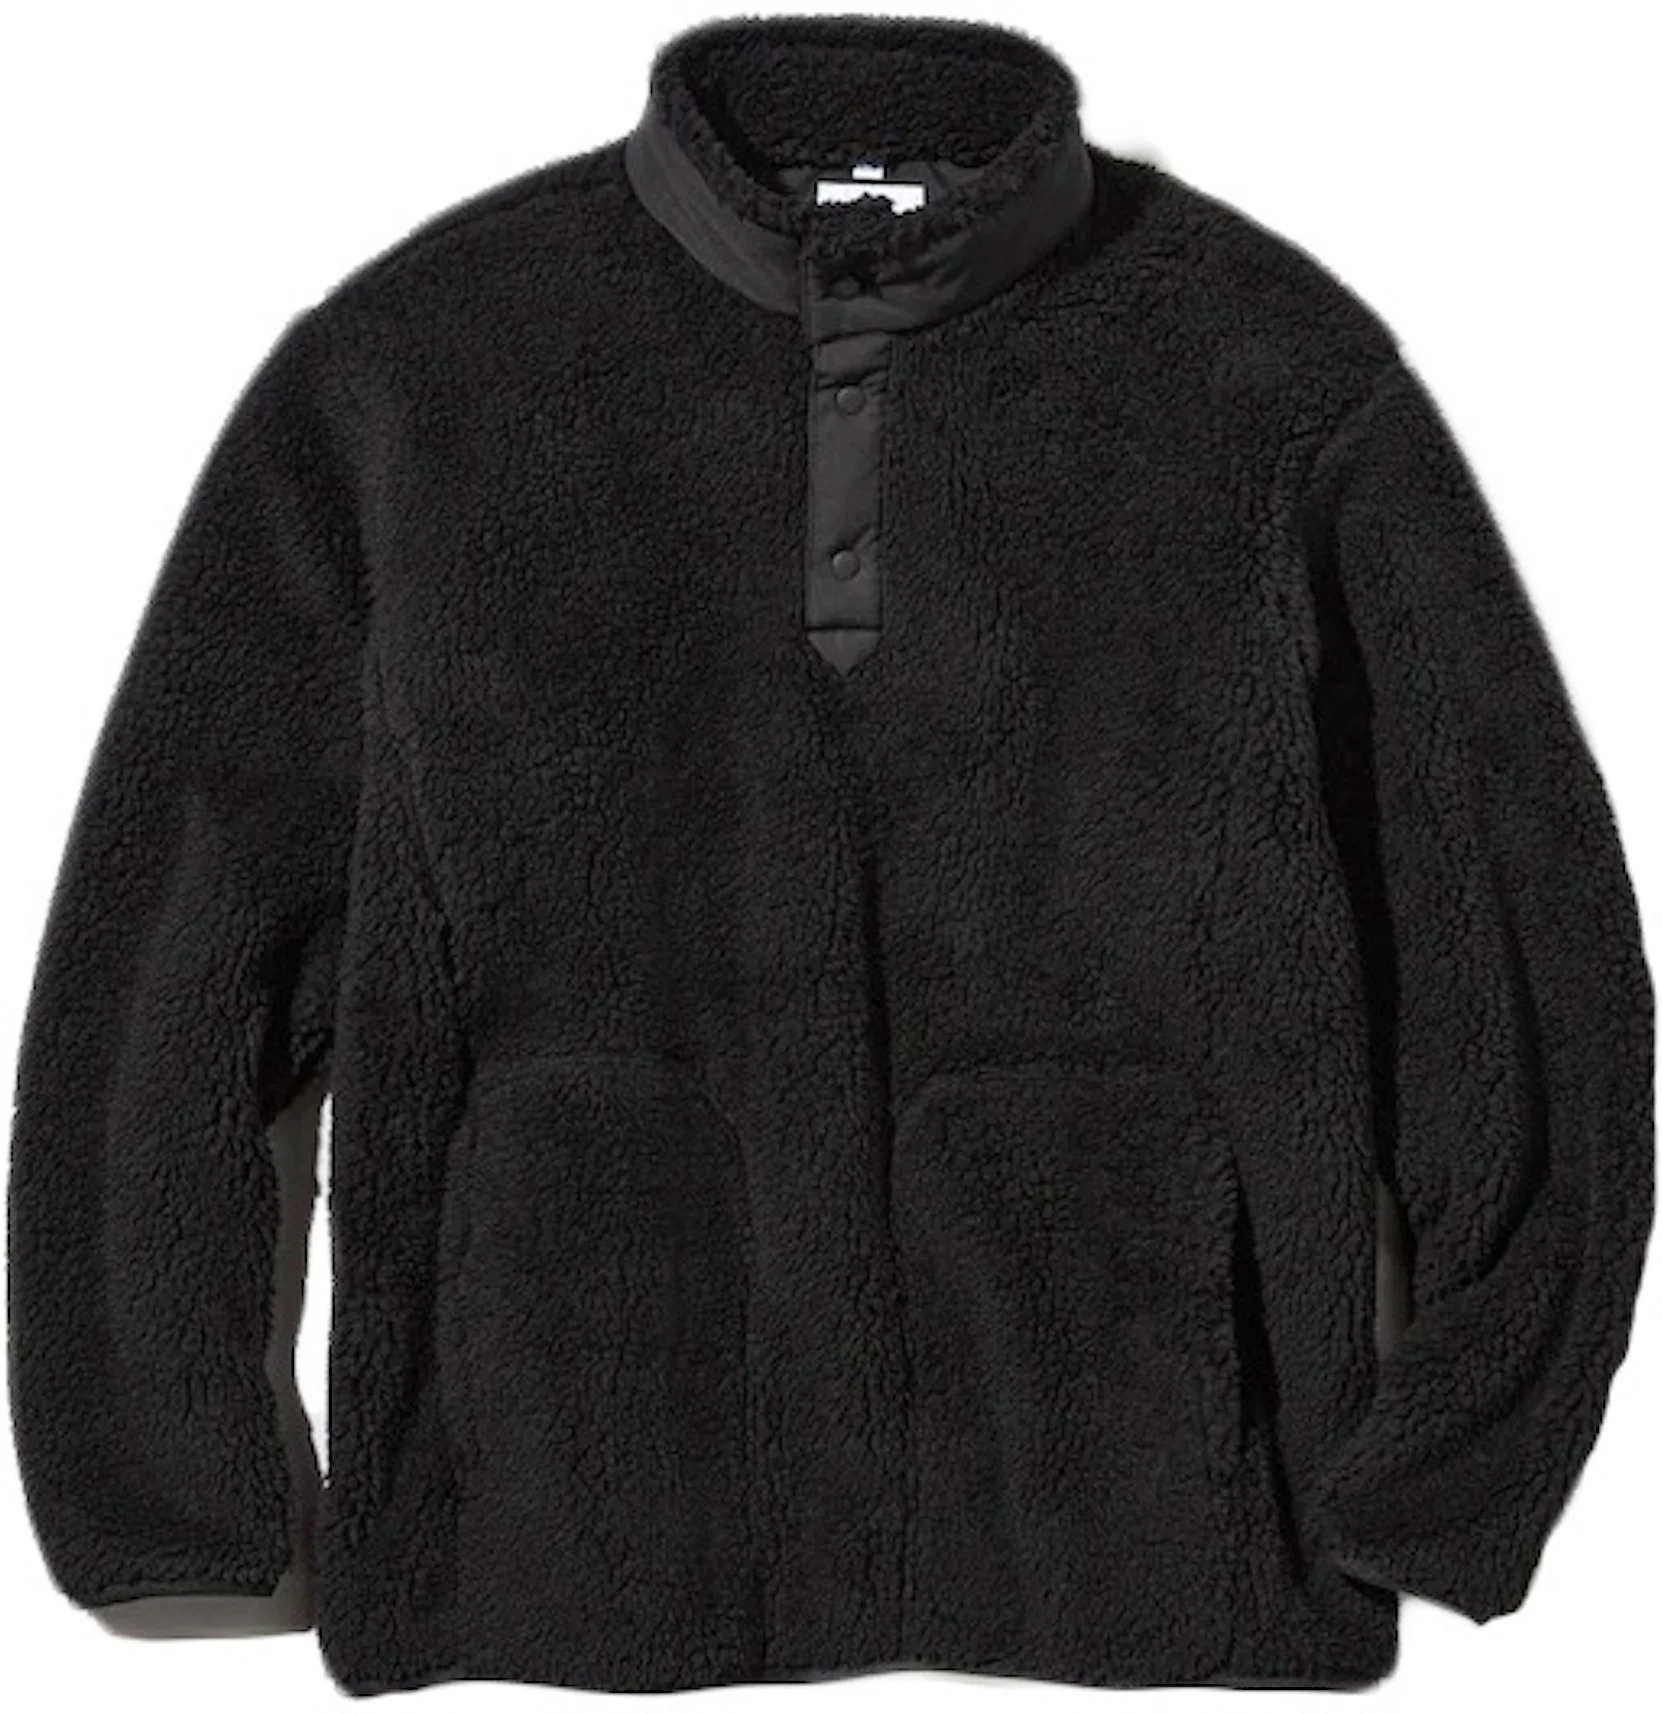 https://images.stockx.com/images/Uniqlo-x-White-Mountaineering-Fleece-Oversized-Longsleeve-Pullover-Asia-Sizing-Black.jpg?fit=fill&bg=FFFFFF&w=1200&h=857&fm=webp&auto=compress&dpr=2&trim=color&updated_at=1637814718&q=60